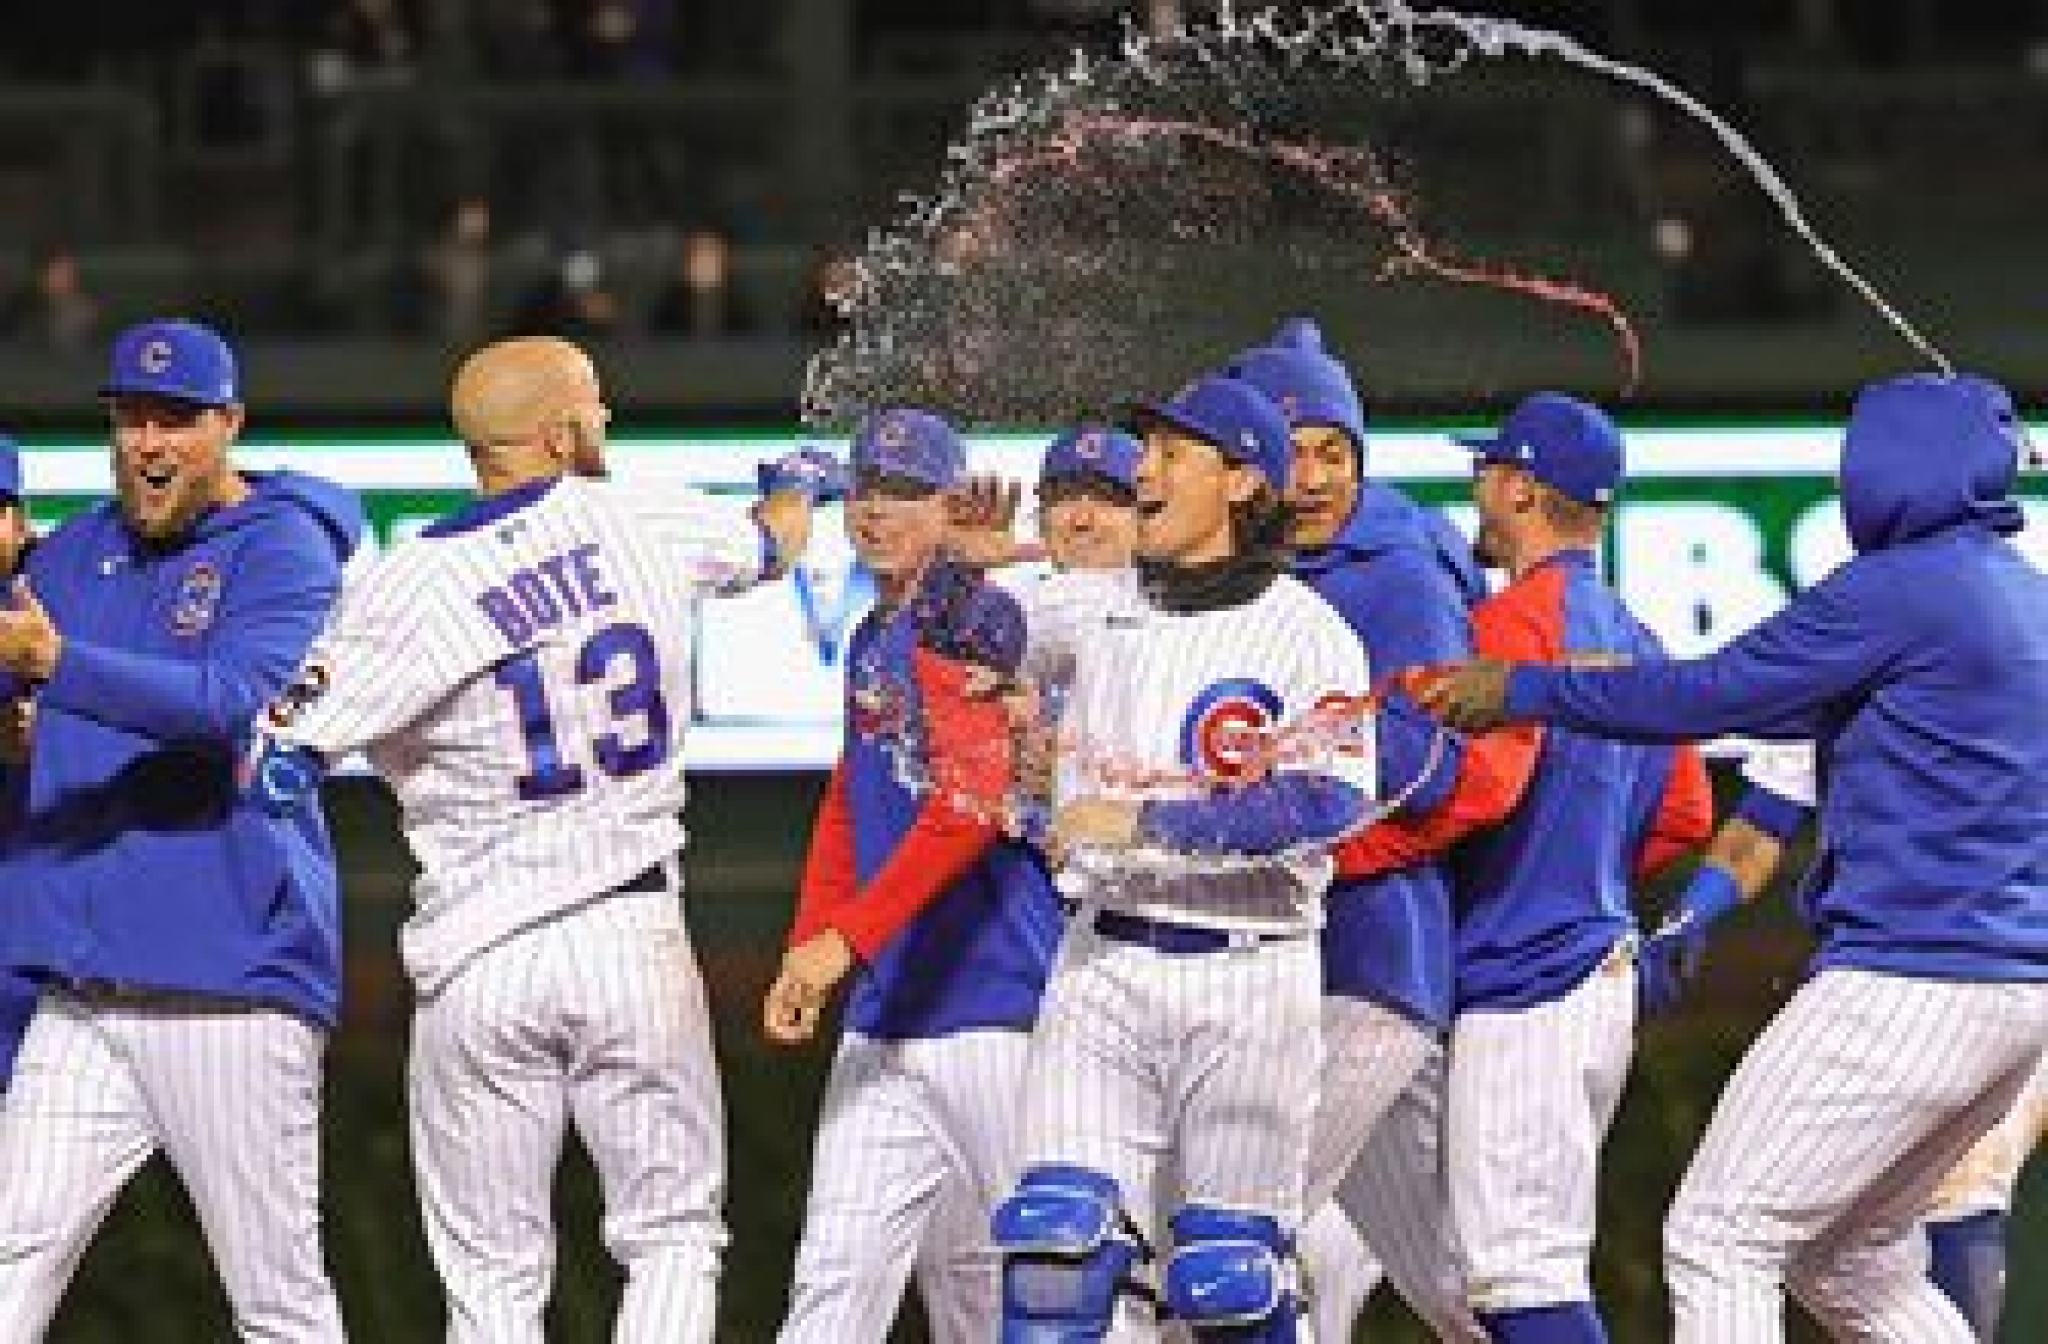 David Bote slaps walk-off single as Cubs earn 4-3 win and doubleheader sweep over Dodgers